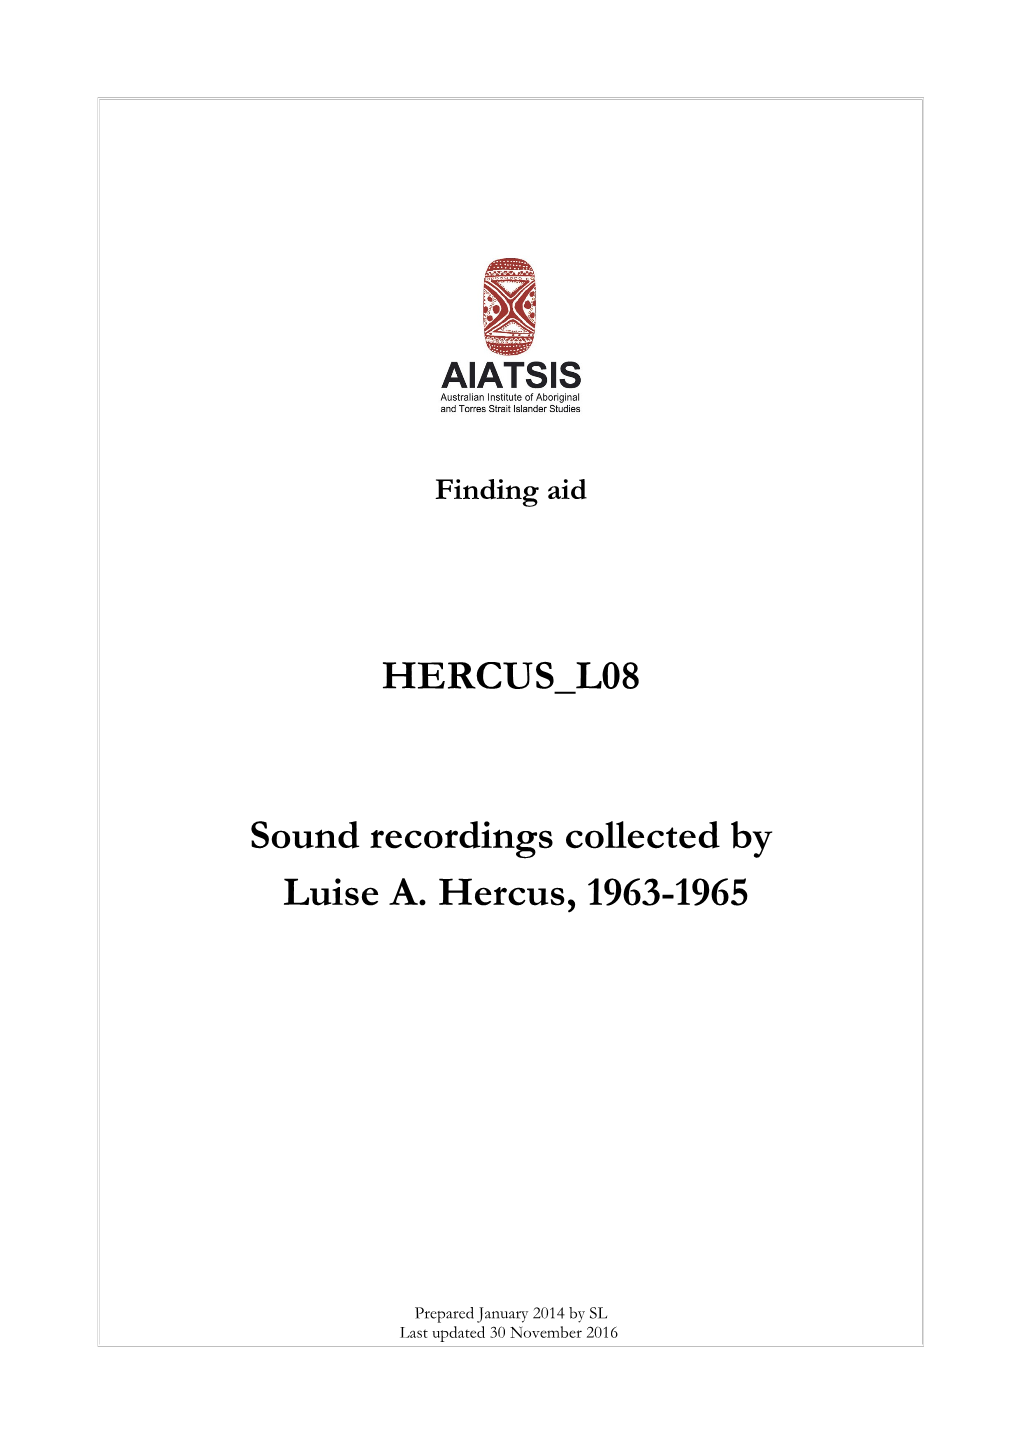 Guide to Sound Recordings Collected by Luise A. Hercus, 1963-1965